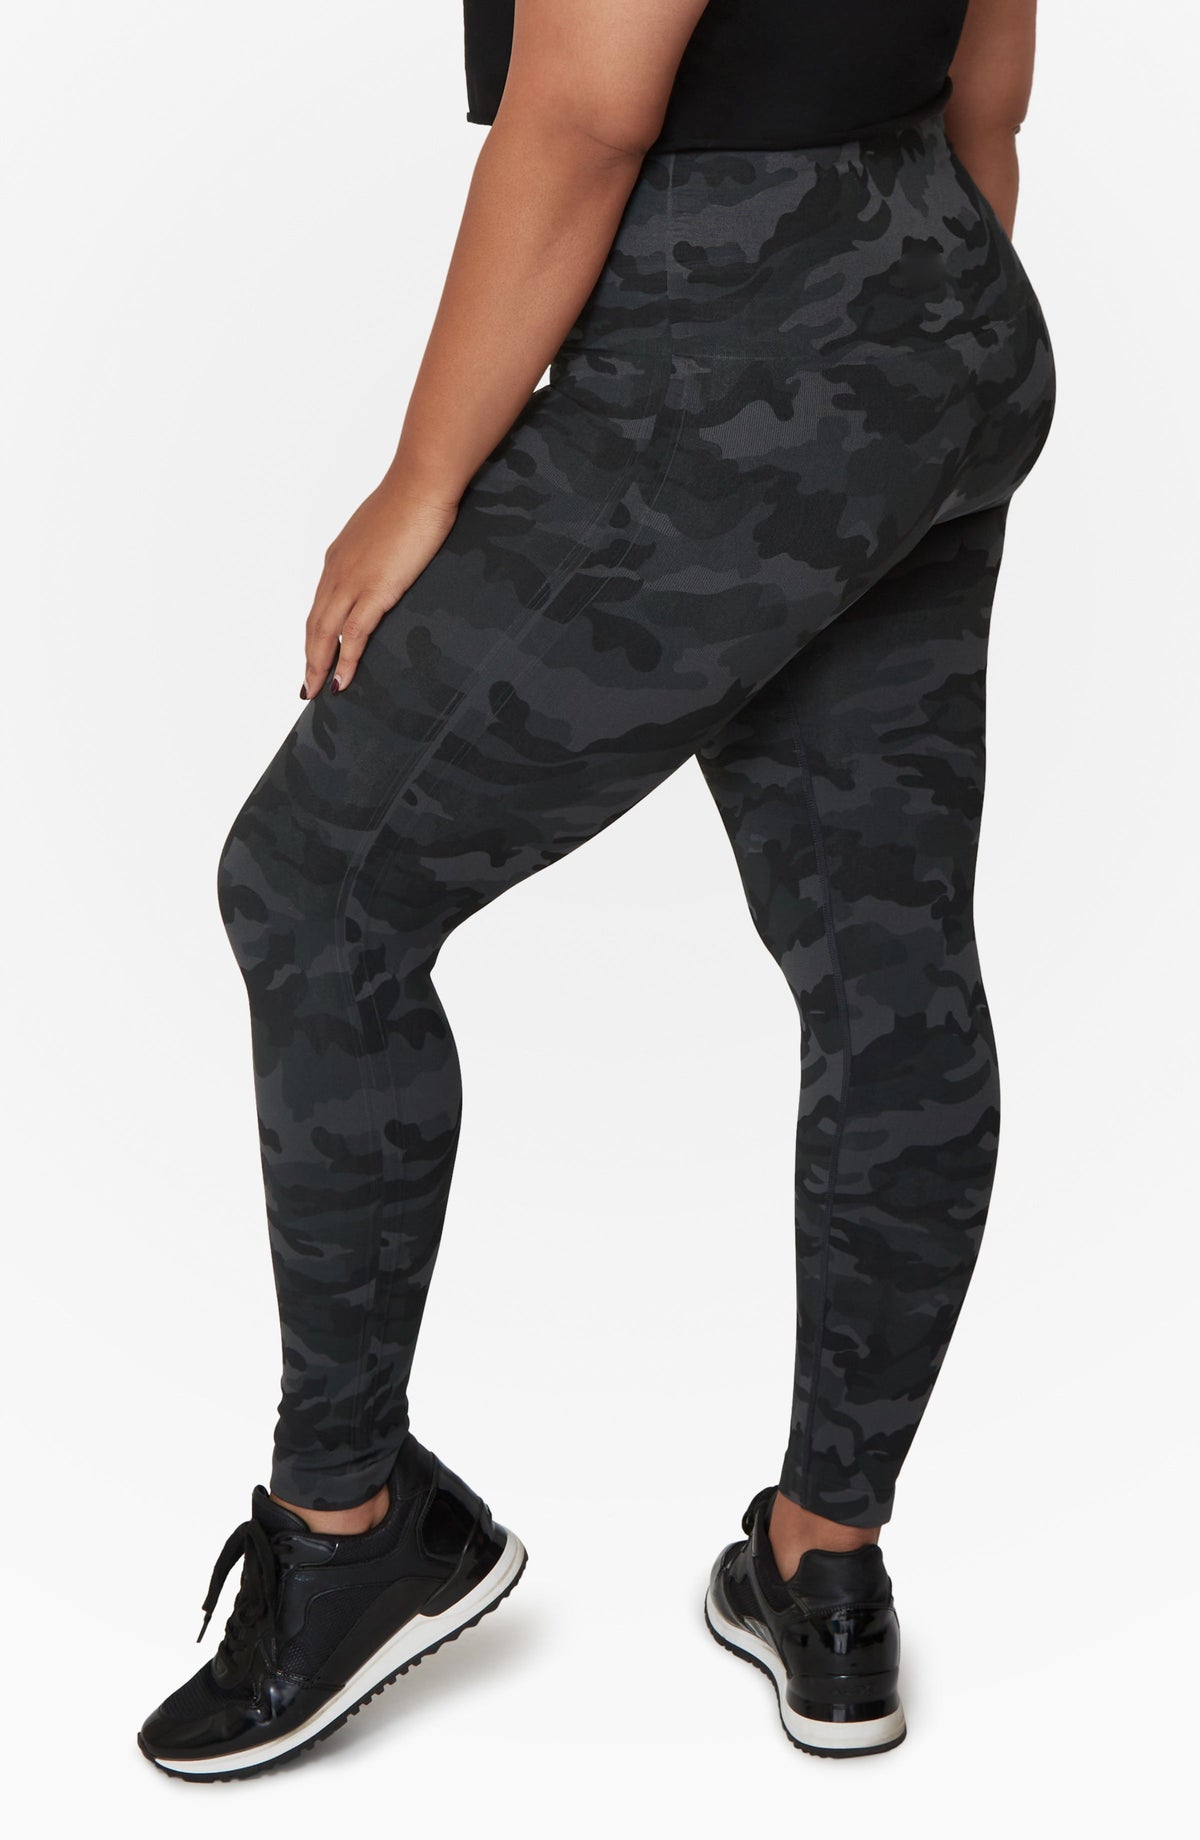 EXTRA PLUS SIZE NAVY AND WHITE CAMOUFLAGE LEGGING CAPRIS – Luv 21